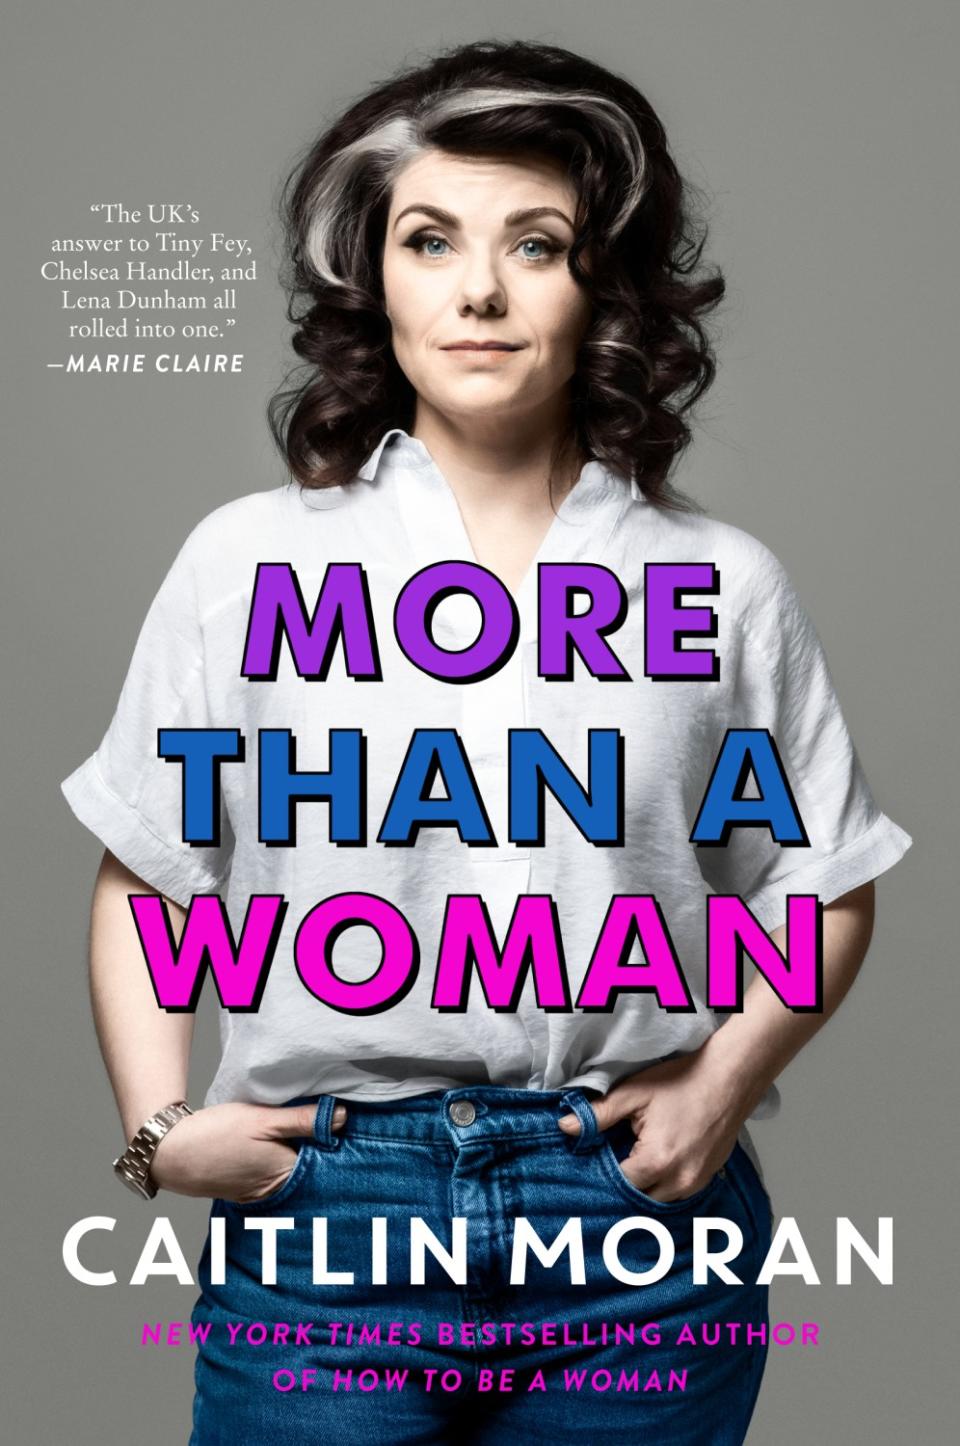 The book jacket for "More Than a Woman" by Caitlin Moran.